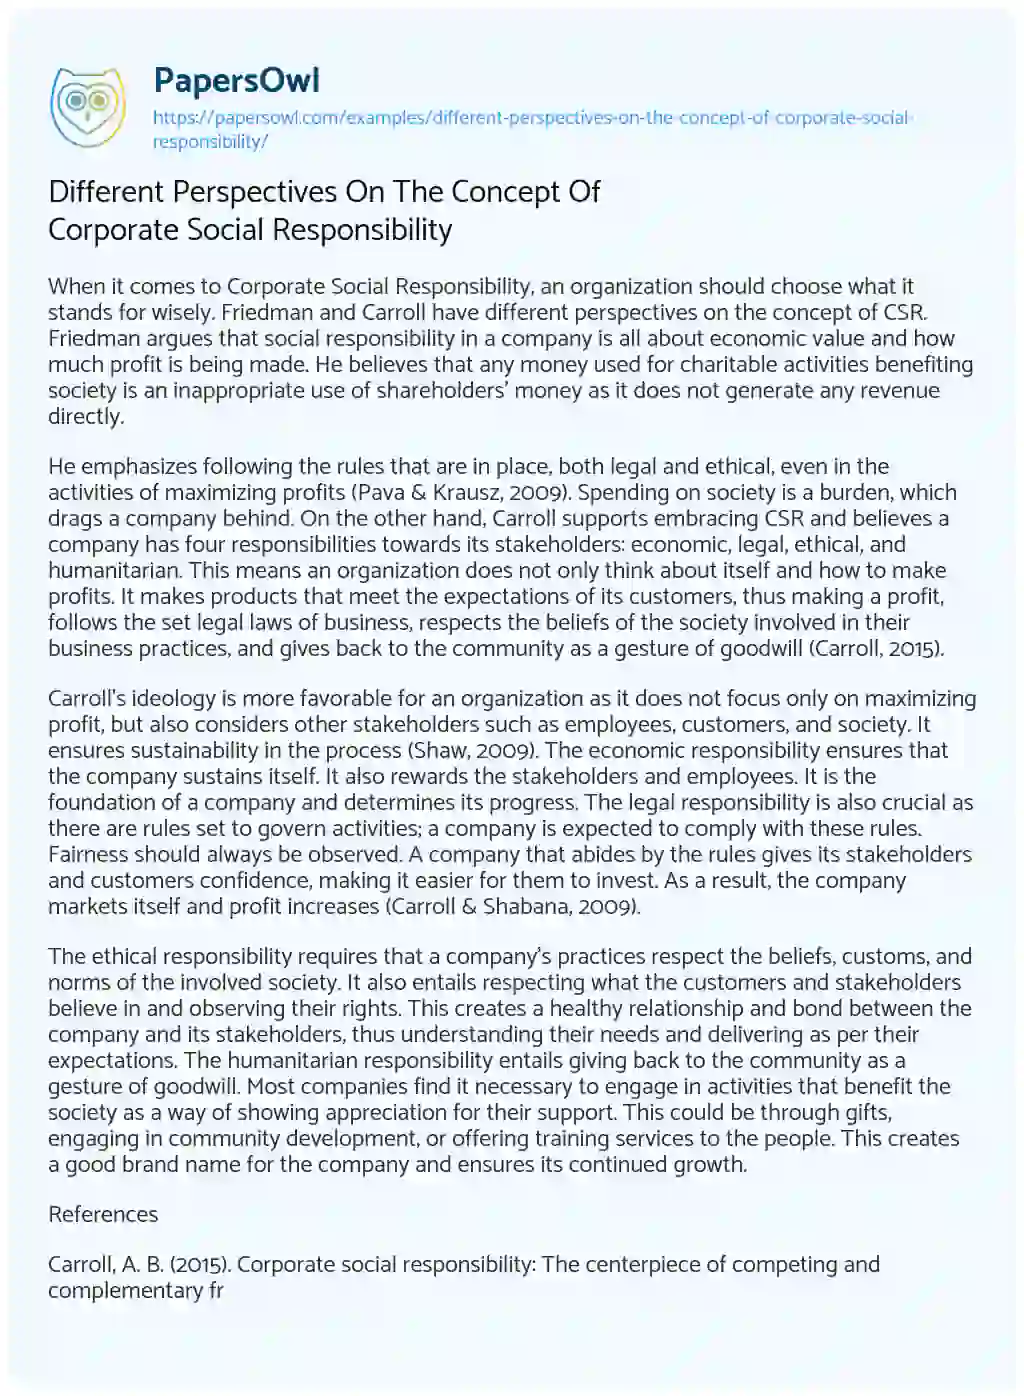 Different Perspectives on the Concept of Corporate Social Responsibility essay